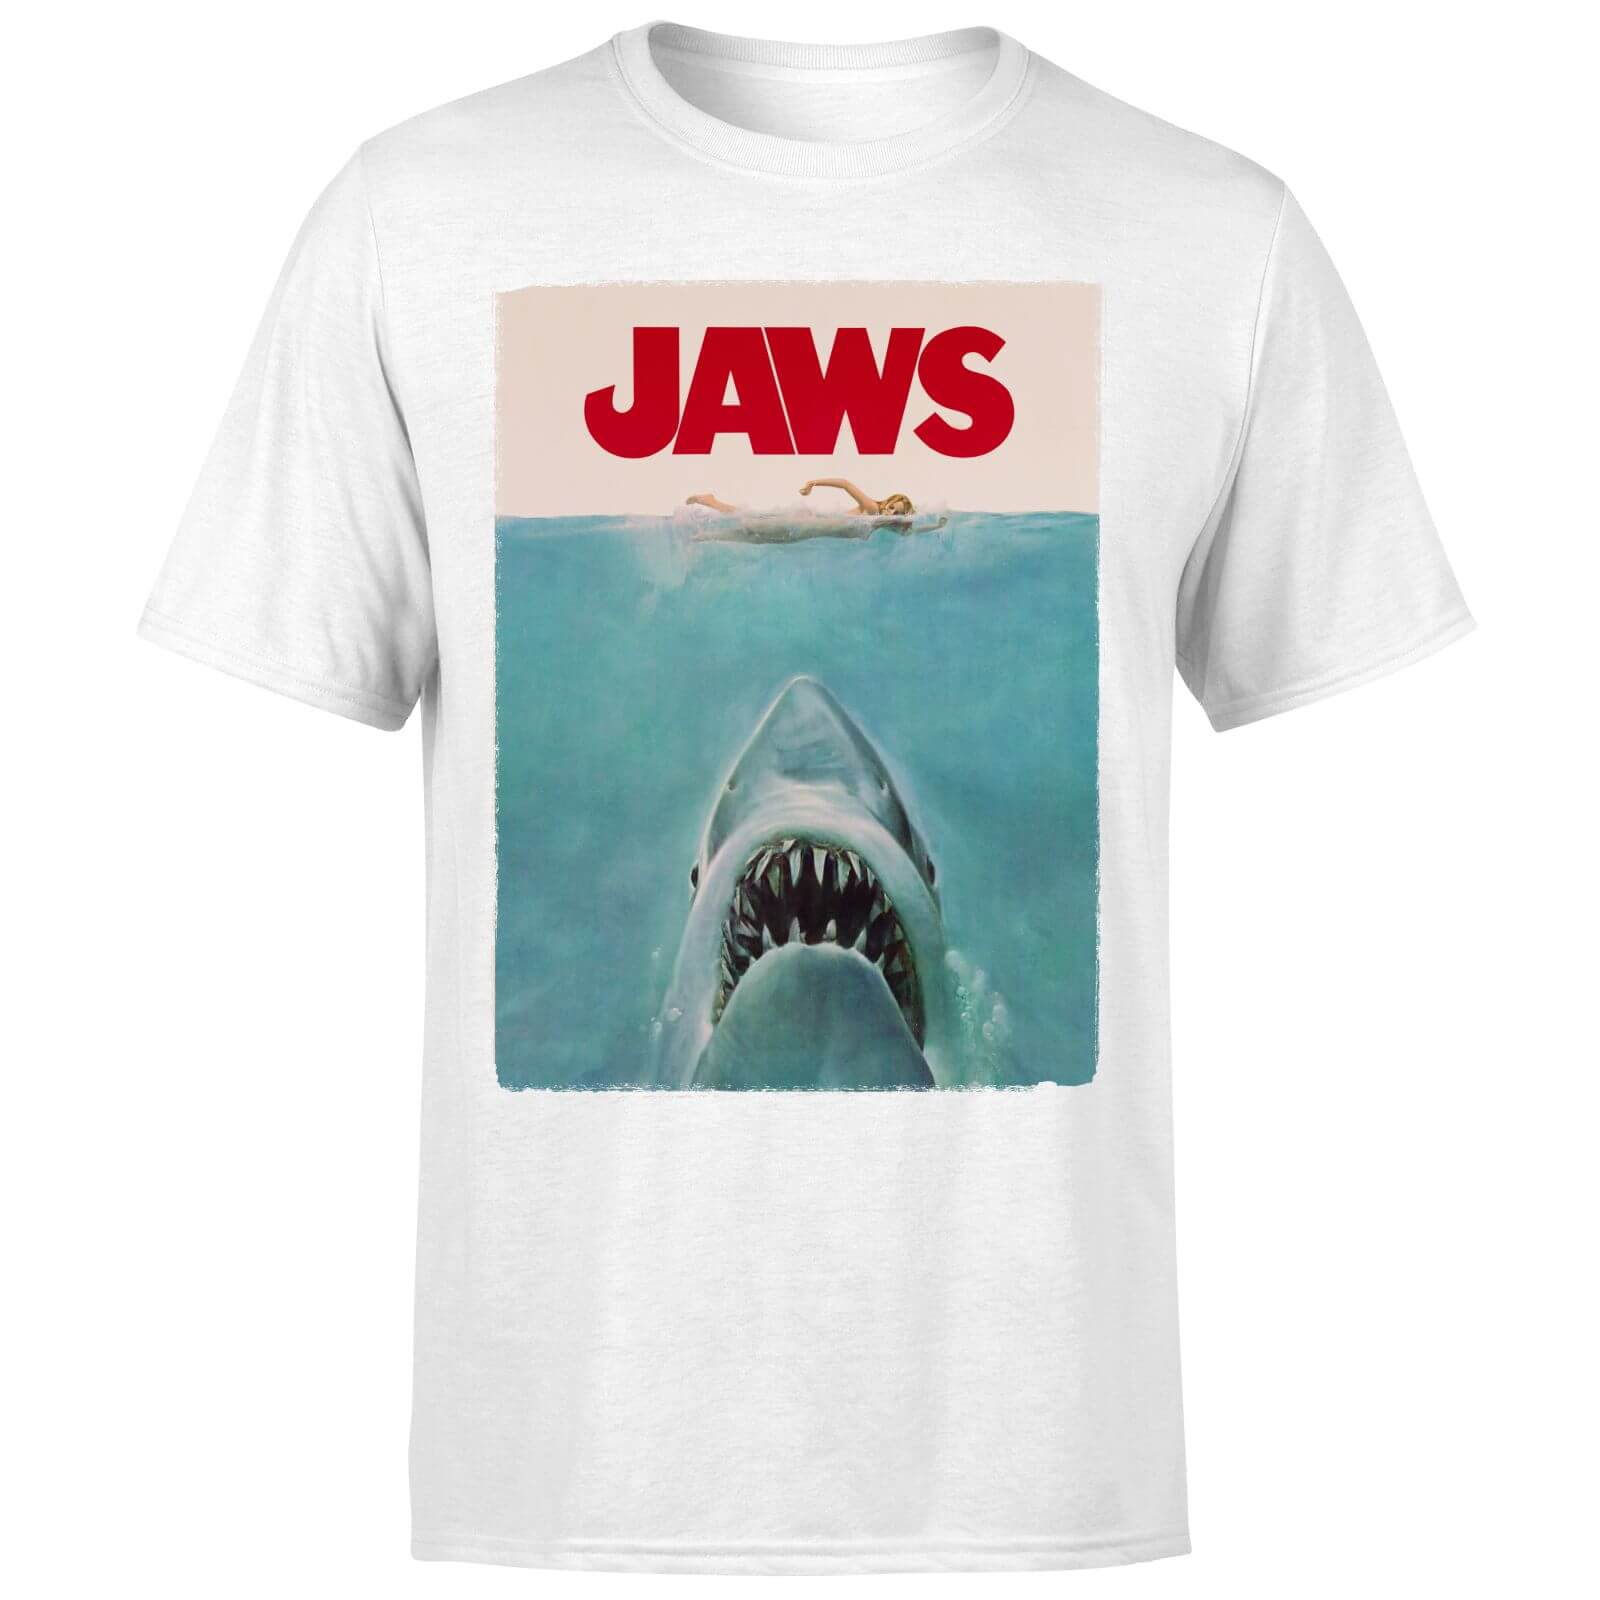 Jaws Classic Poster T-Shirt - White - 3XL